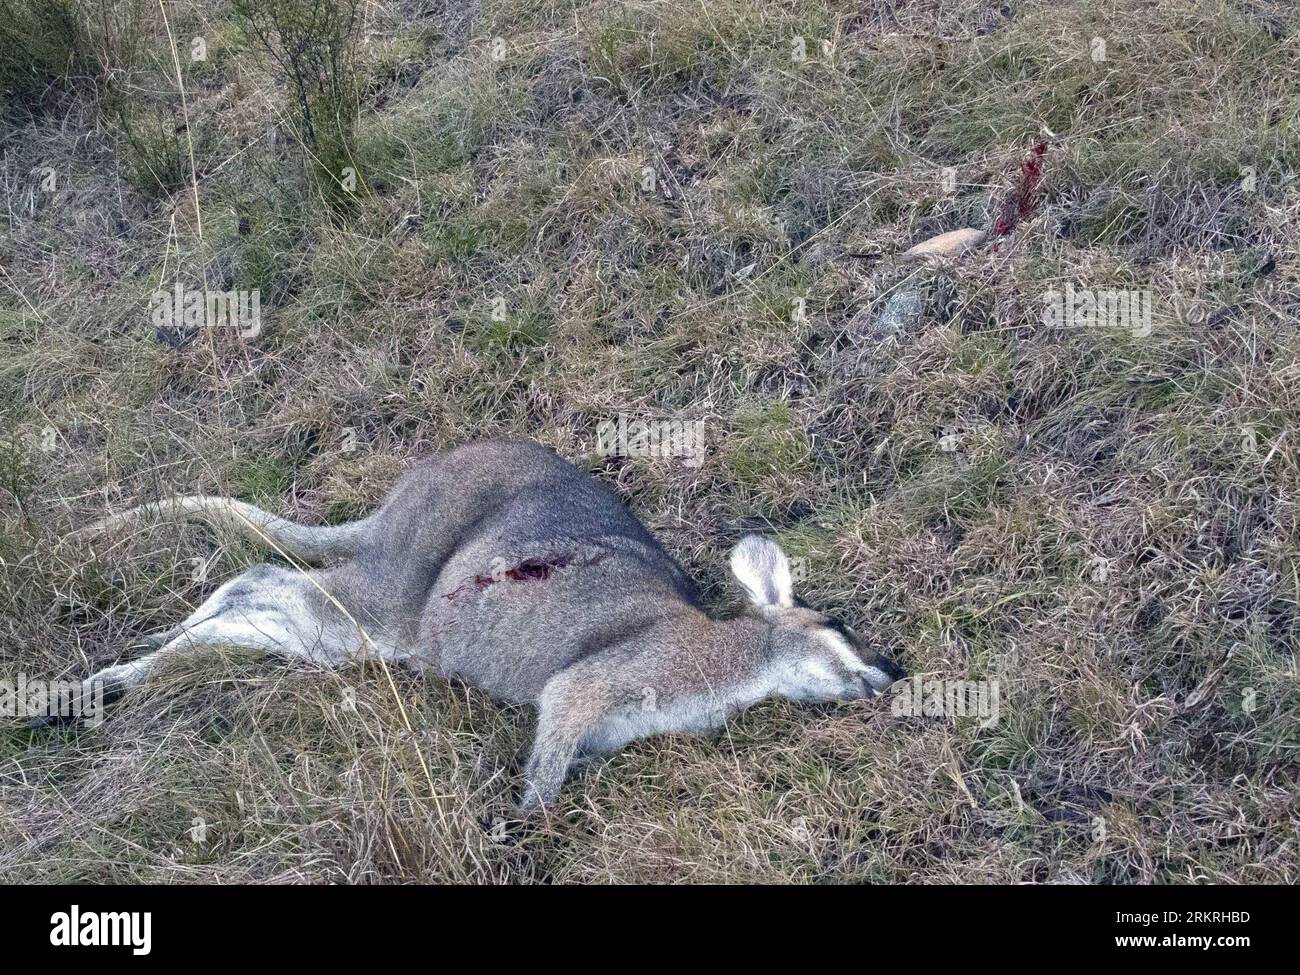 Bildnummer: 58249607  Datum: 16.07.2012  Copyright: imago/Xinhua (120716) -- MUDGEE, July 16, 2012 (Xinhua) -- A kangaroo is shot dead at a farm in Mudgee, New South Wales, Australia, July 16, 2012. Australian government allows up to 5.2 million kangaroos and wallabies to be commercially hunted in 2012. (Xinhua/Jin Linpeng)(zjl) AUSTRALIA-MUDGEE-KANGAROO-HUNTING PUBLICATIONxNOTxINxCHN Gesellschaft Jagd Jäger Känguru x0x xst 2012 quer      58249607 Date 16 07 2012 Copyright Imago XINHUA  Mudgee July 16 2012 XINHUA a Kangaroo IS Shot Dead AT a Farm in Mudgee New South Wales Australia July 16 201 Stock Photo